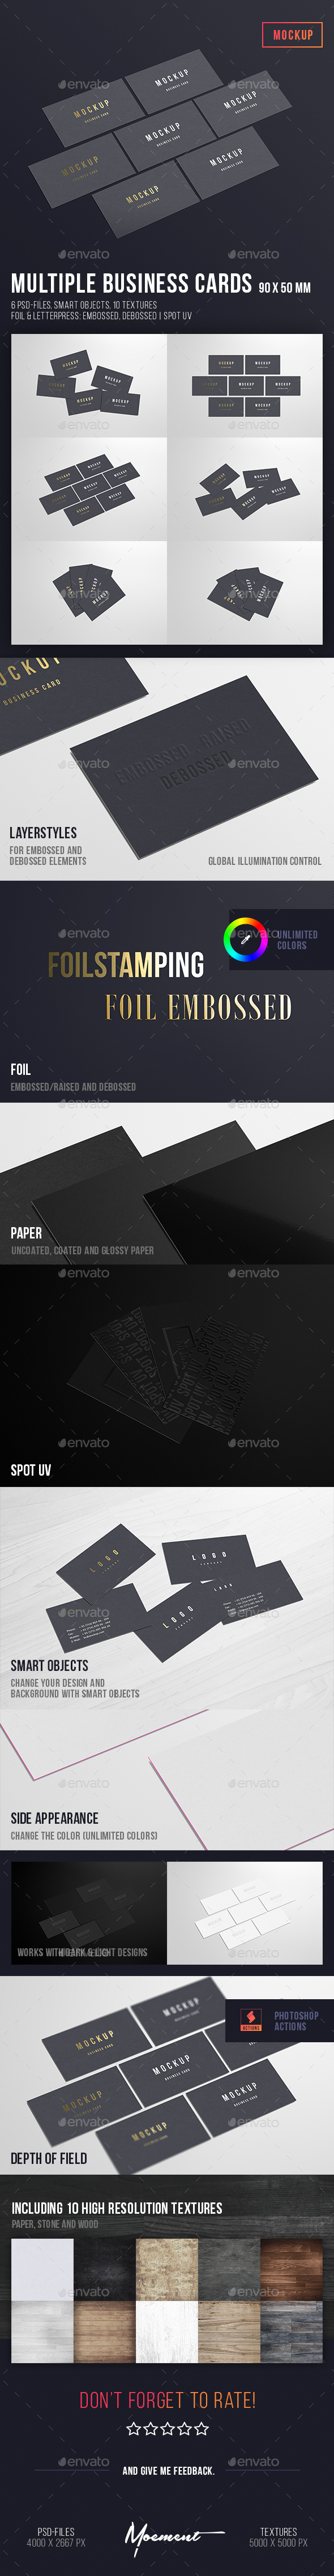 Download Spot Uv Graphics Designs Templates From Graphicriver